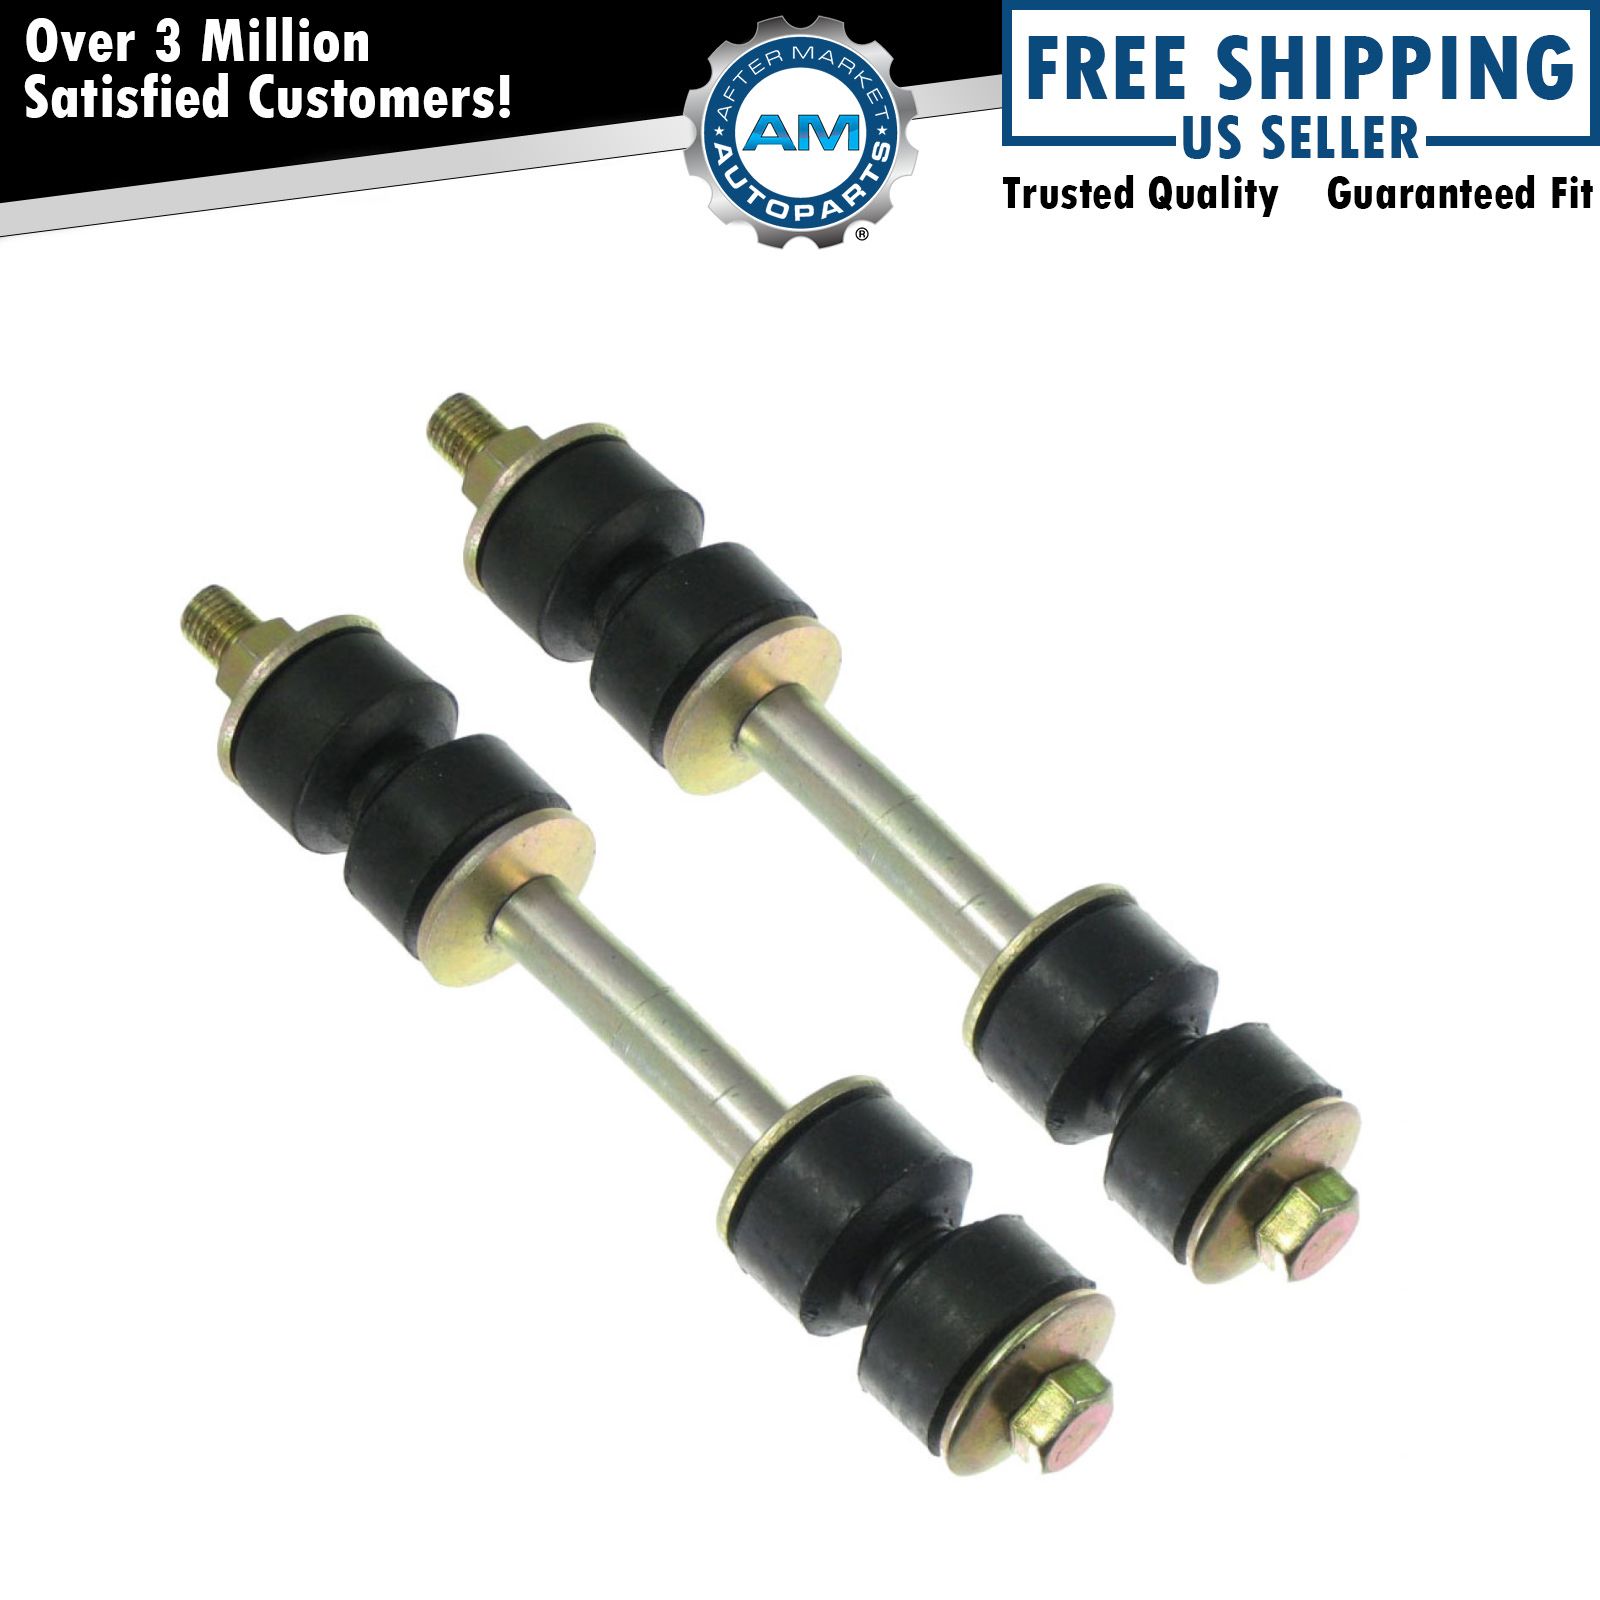 Front Sway Bar Link Kit Pair Set for GMC Buick Chevy Olds Pontiac Pickup Truck